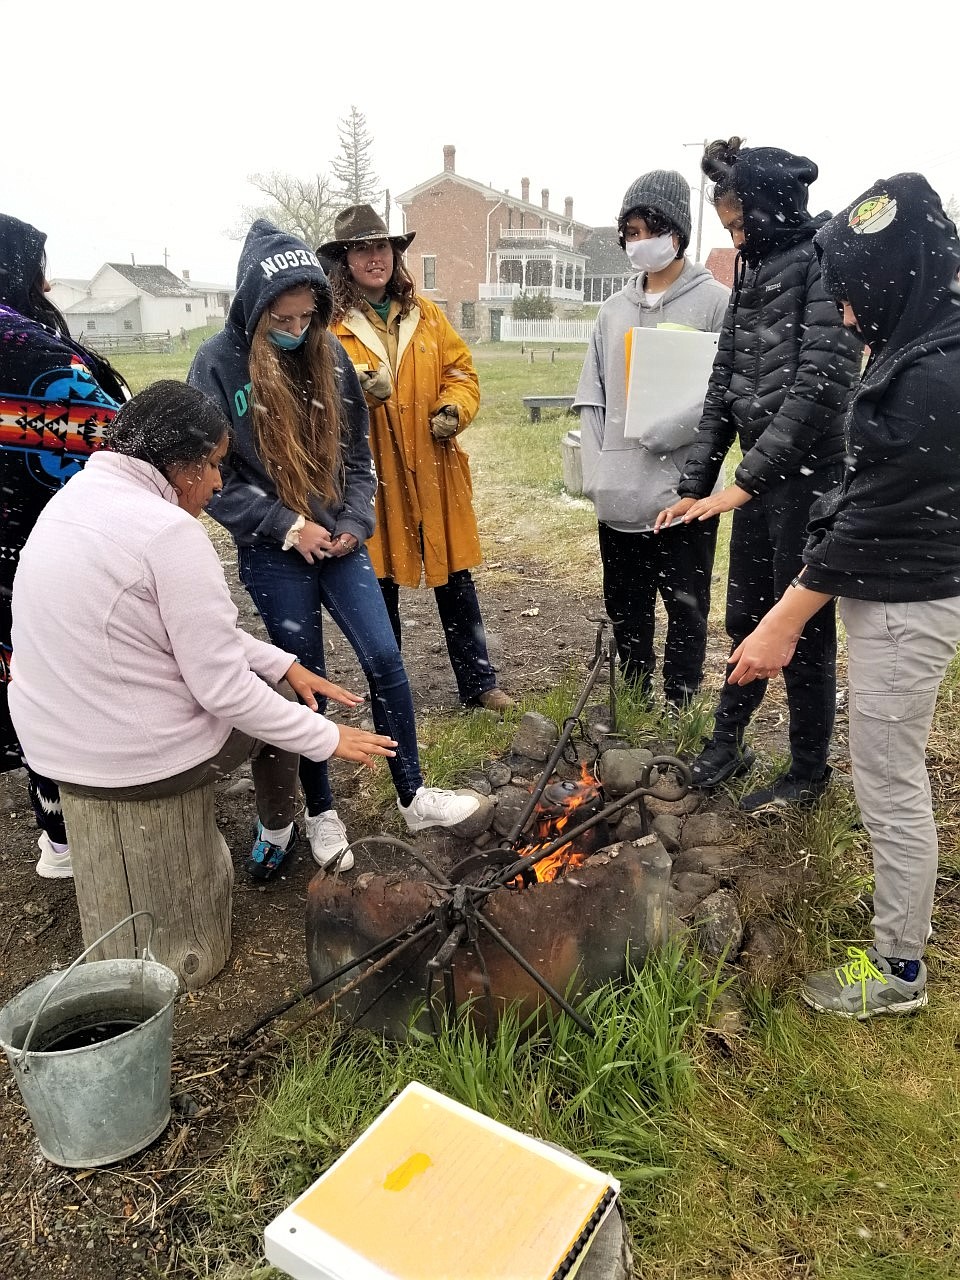 Unseasonably cold weather made the chuckwagon fire at Grant Kohrs Ranch a choice gathering spot for the annual eighth-grade Montana history field tour. (Courtesy of Stacey Doll)